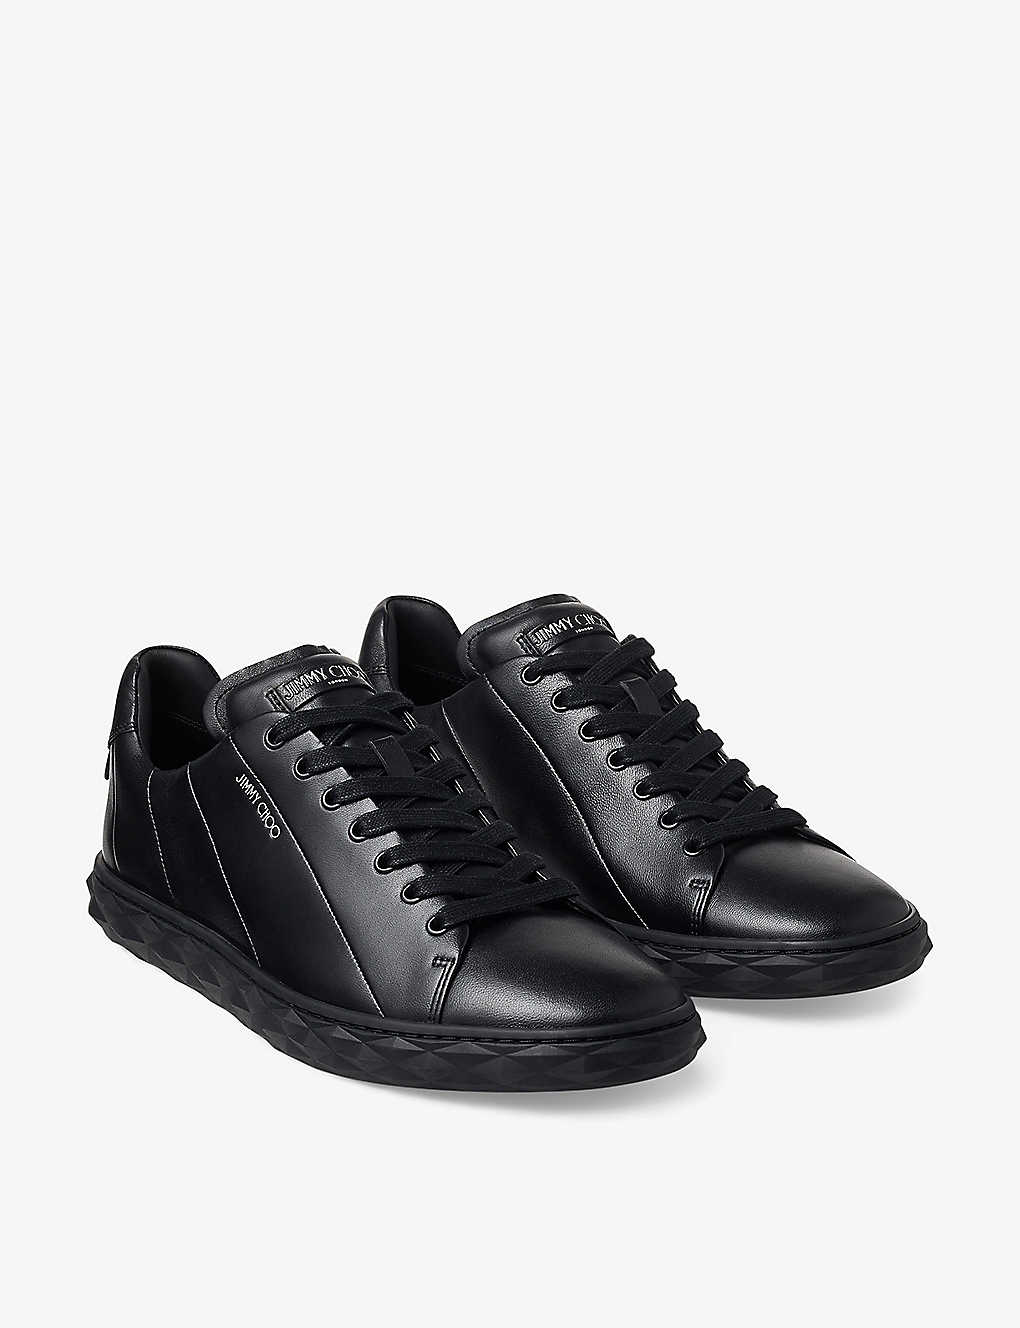 JIMMY CHOO Diamond Light Maxi branded leather low-top trainers